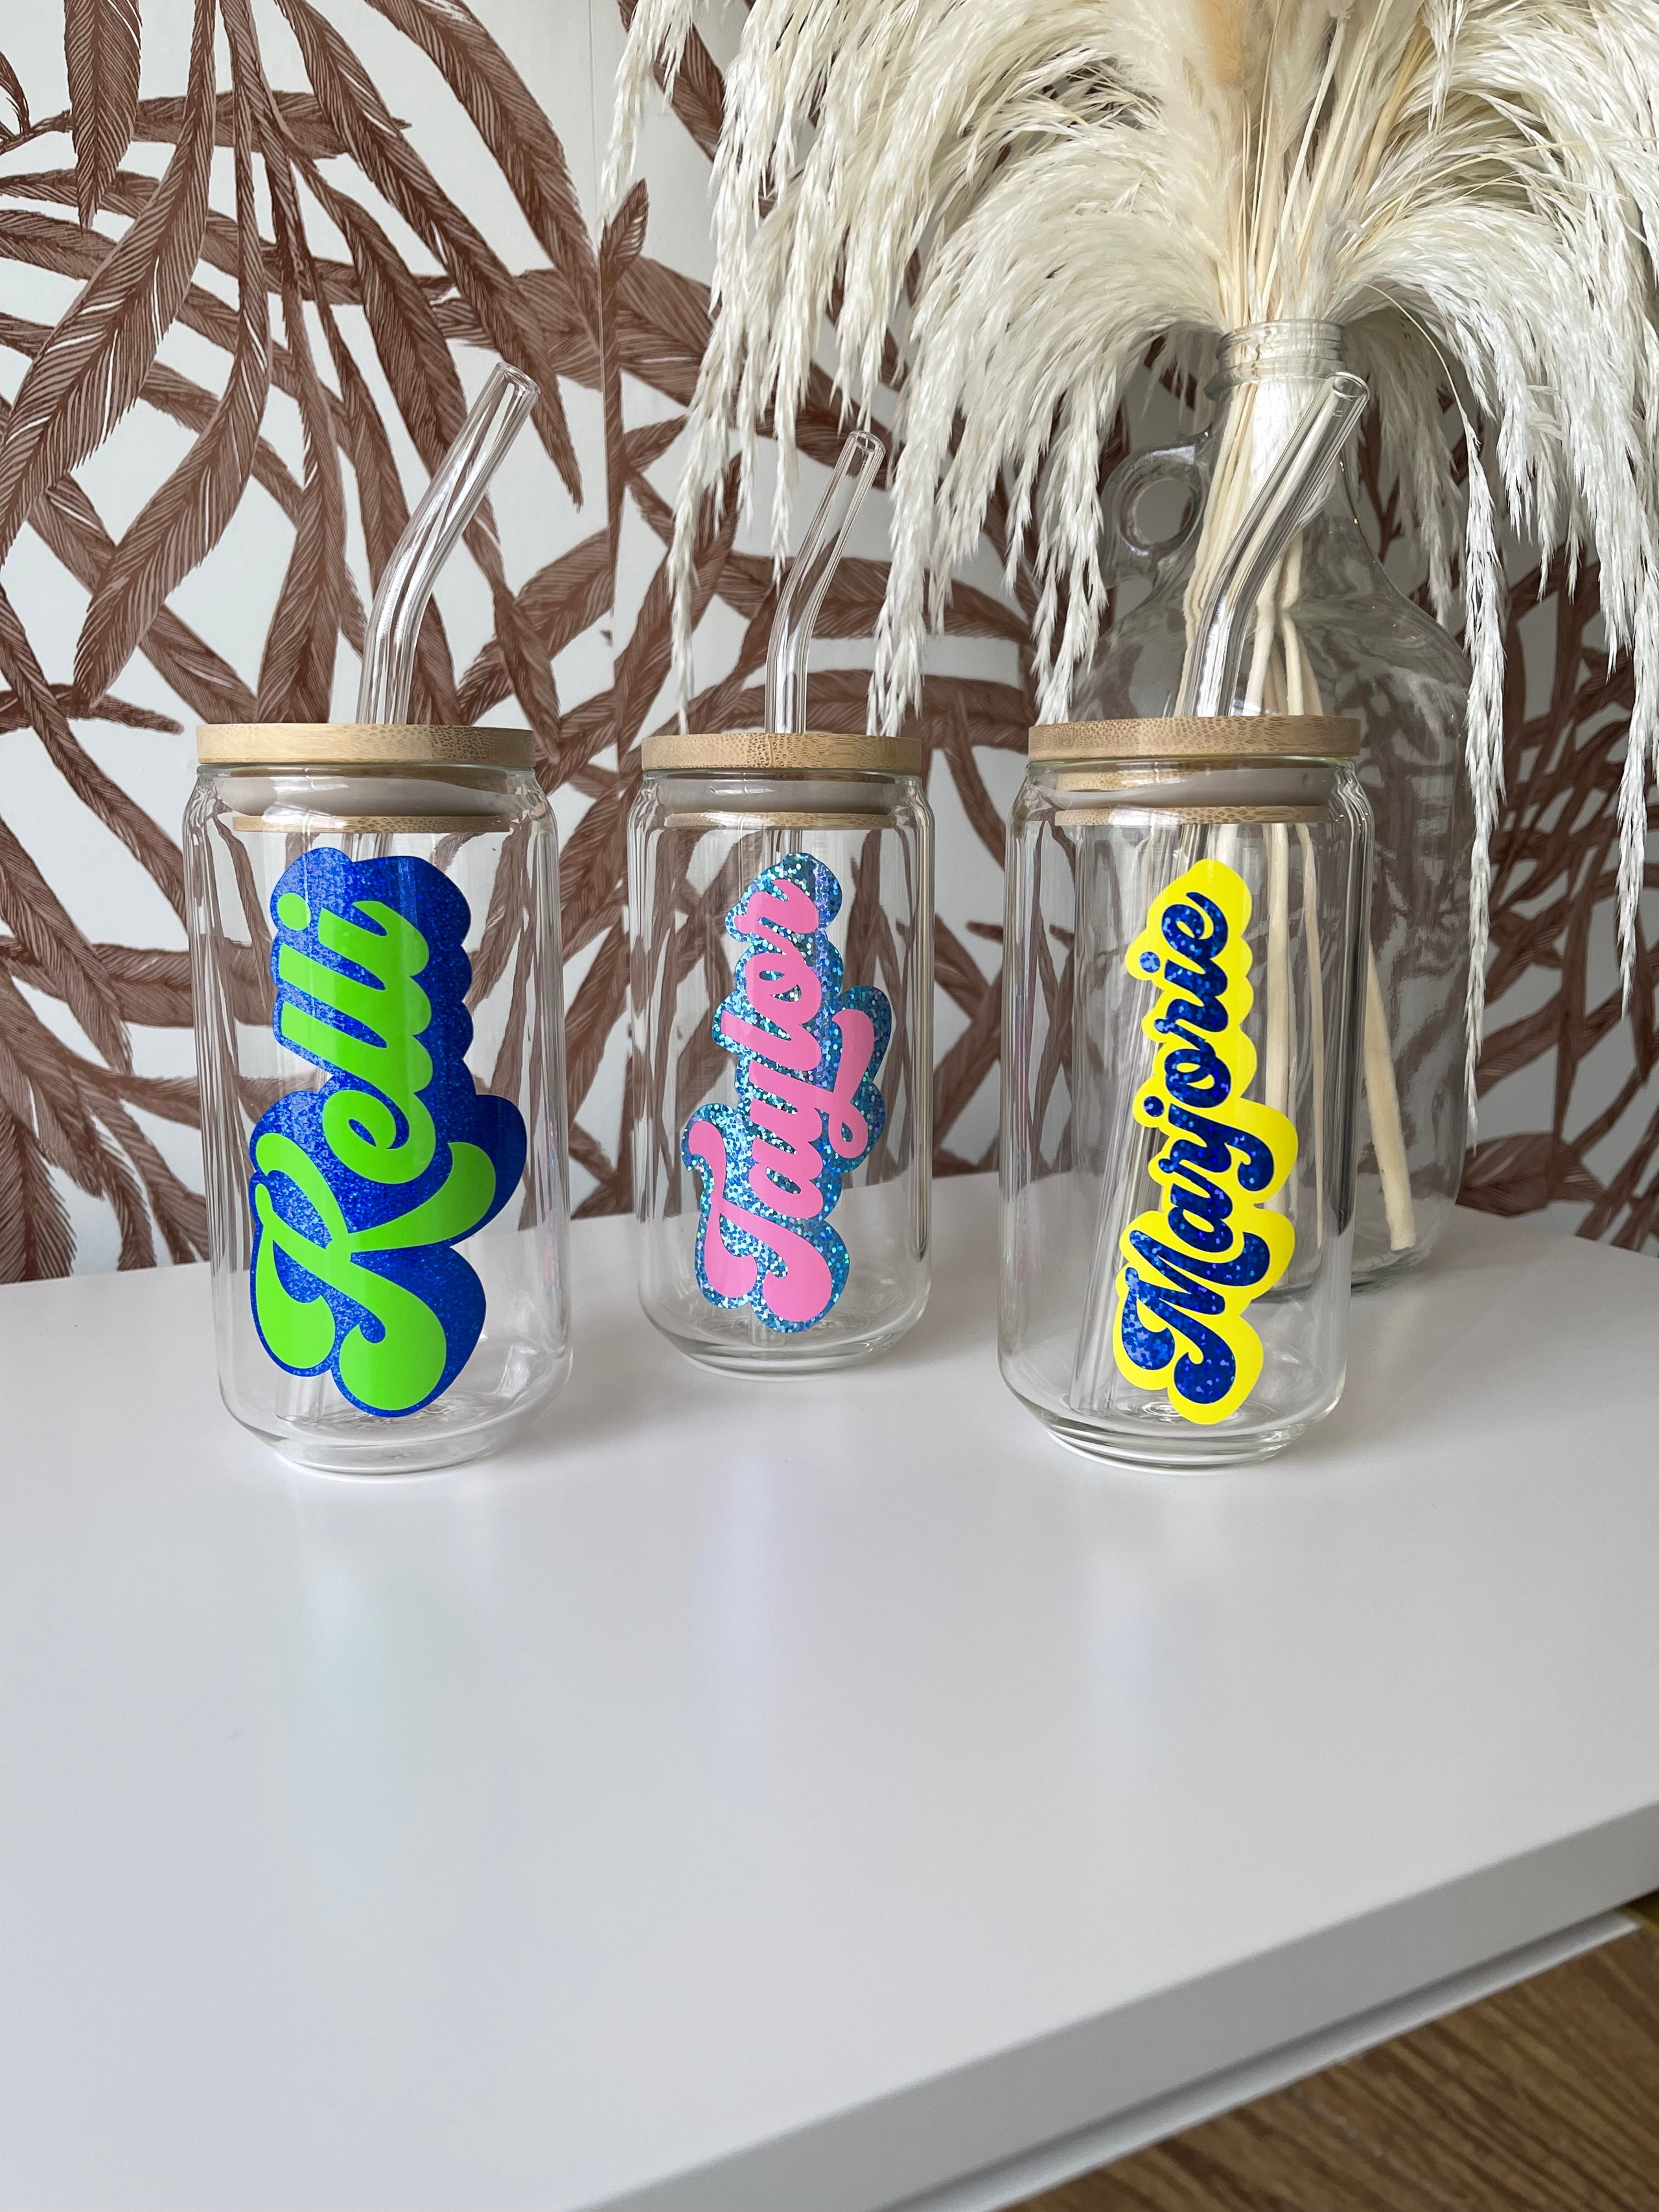 Your Name Custom Glass Beer Can Glass Cup Vertical –